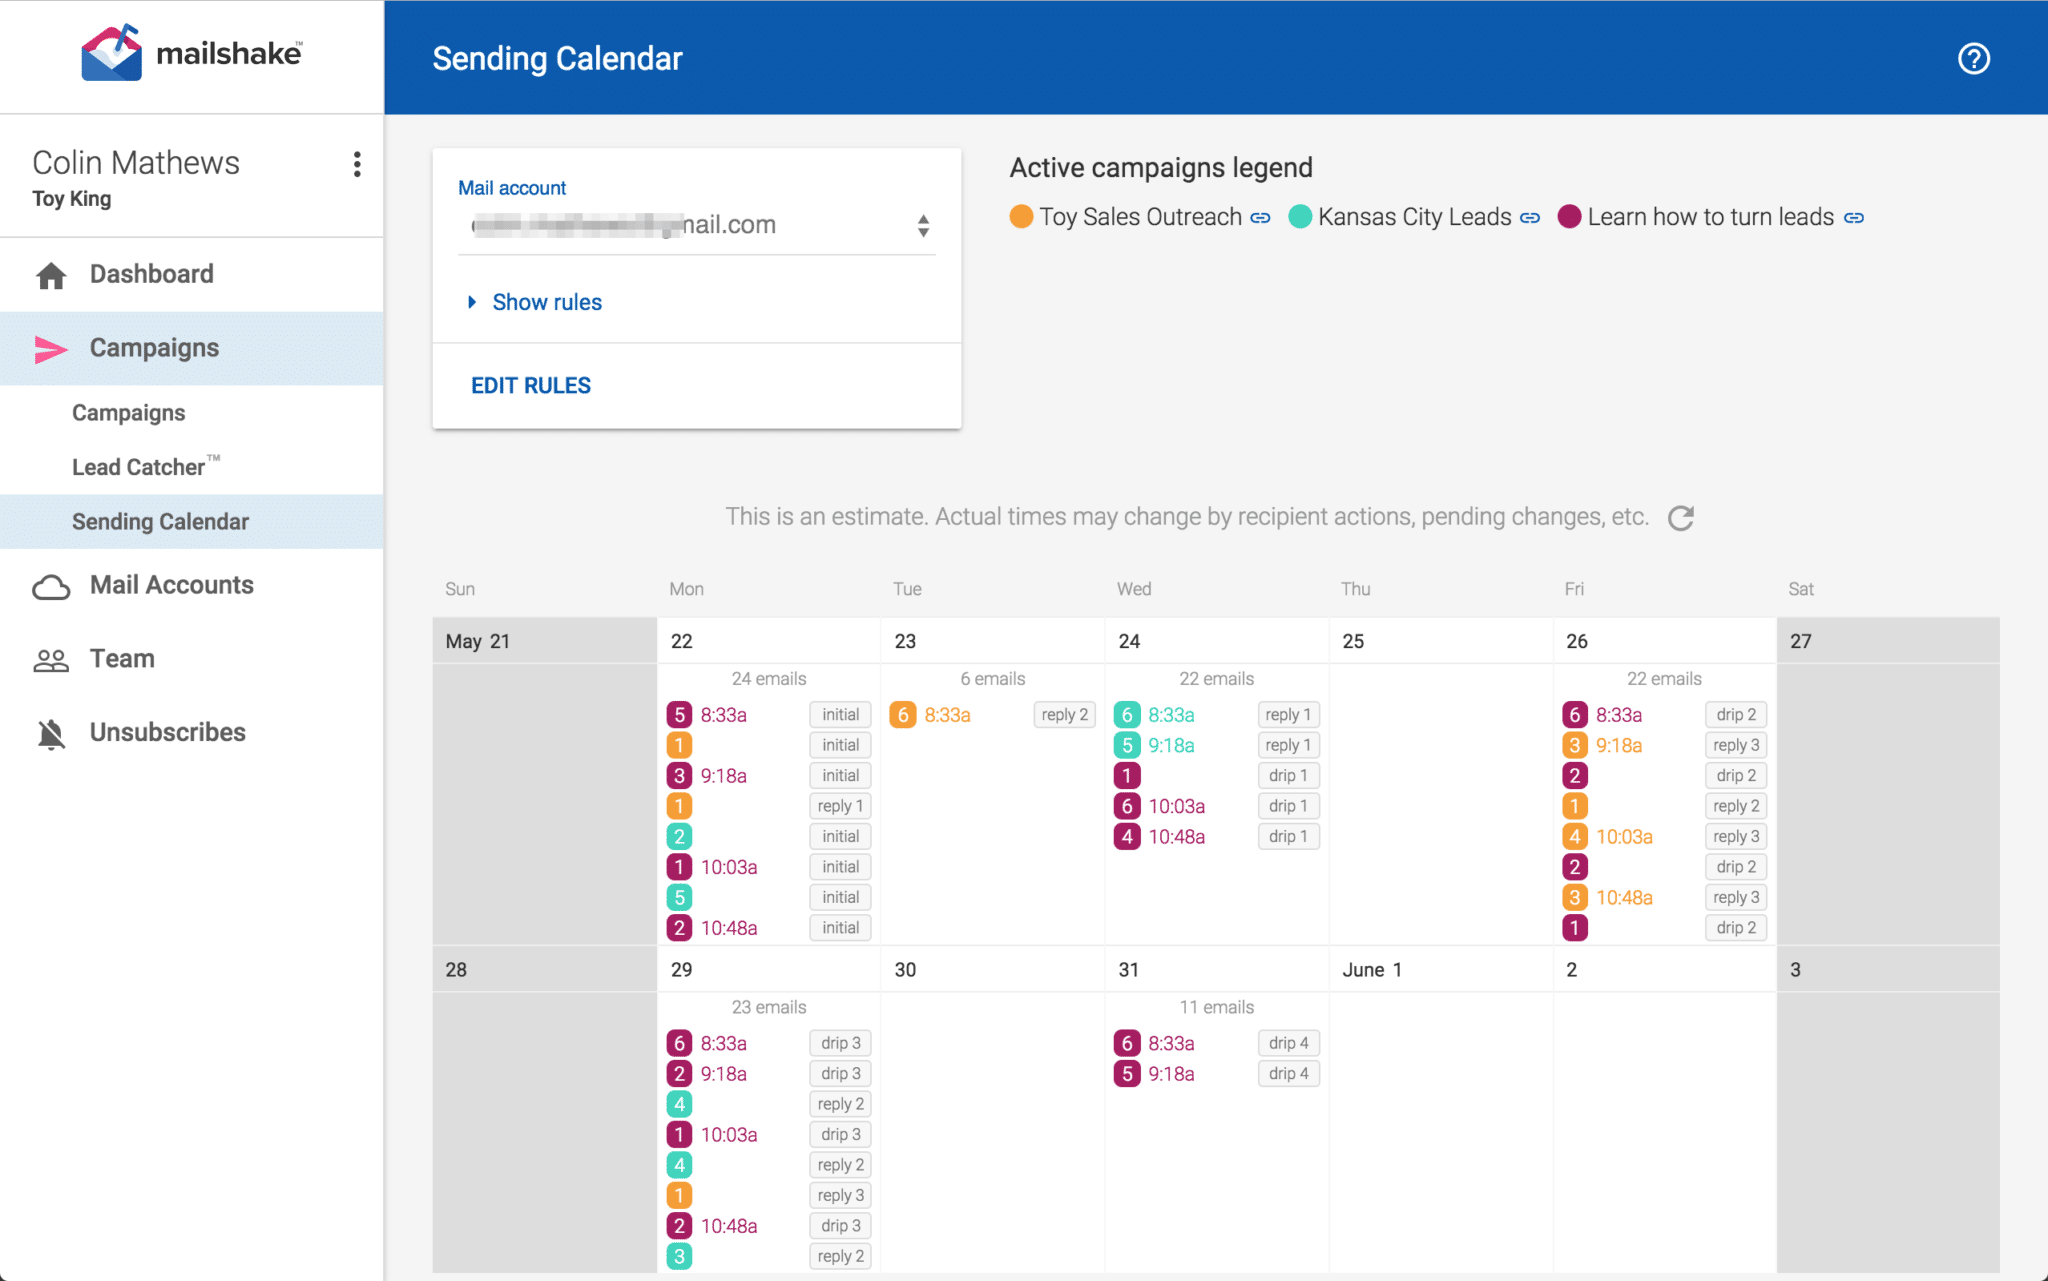 Set email sending rules across all campaigns by 'Sending Calendar' under 'Campaigns' on Mailshake.